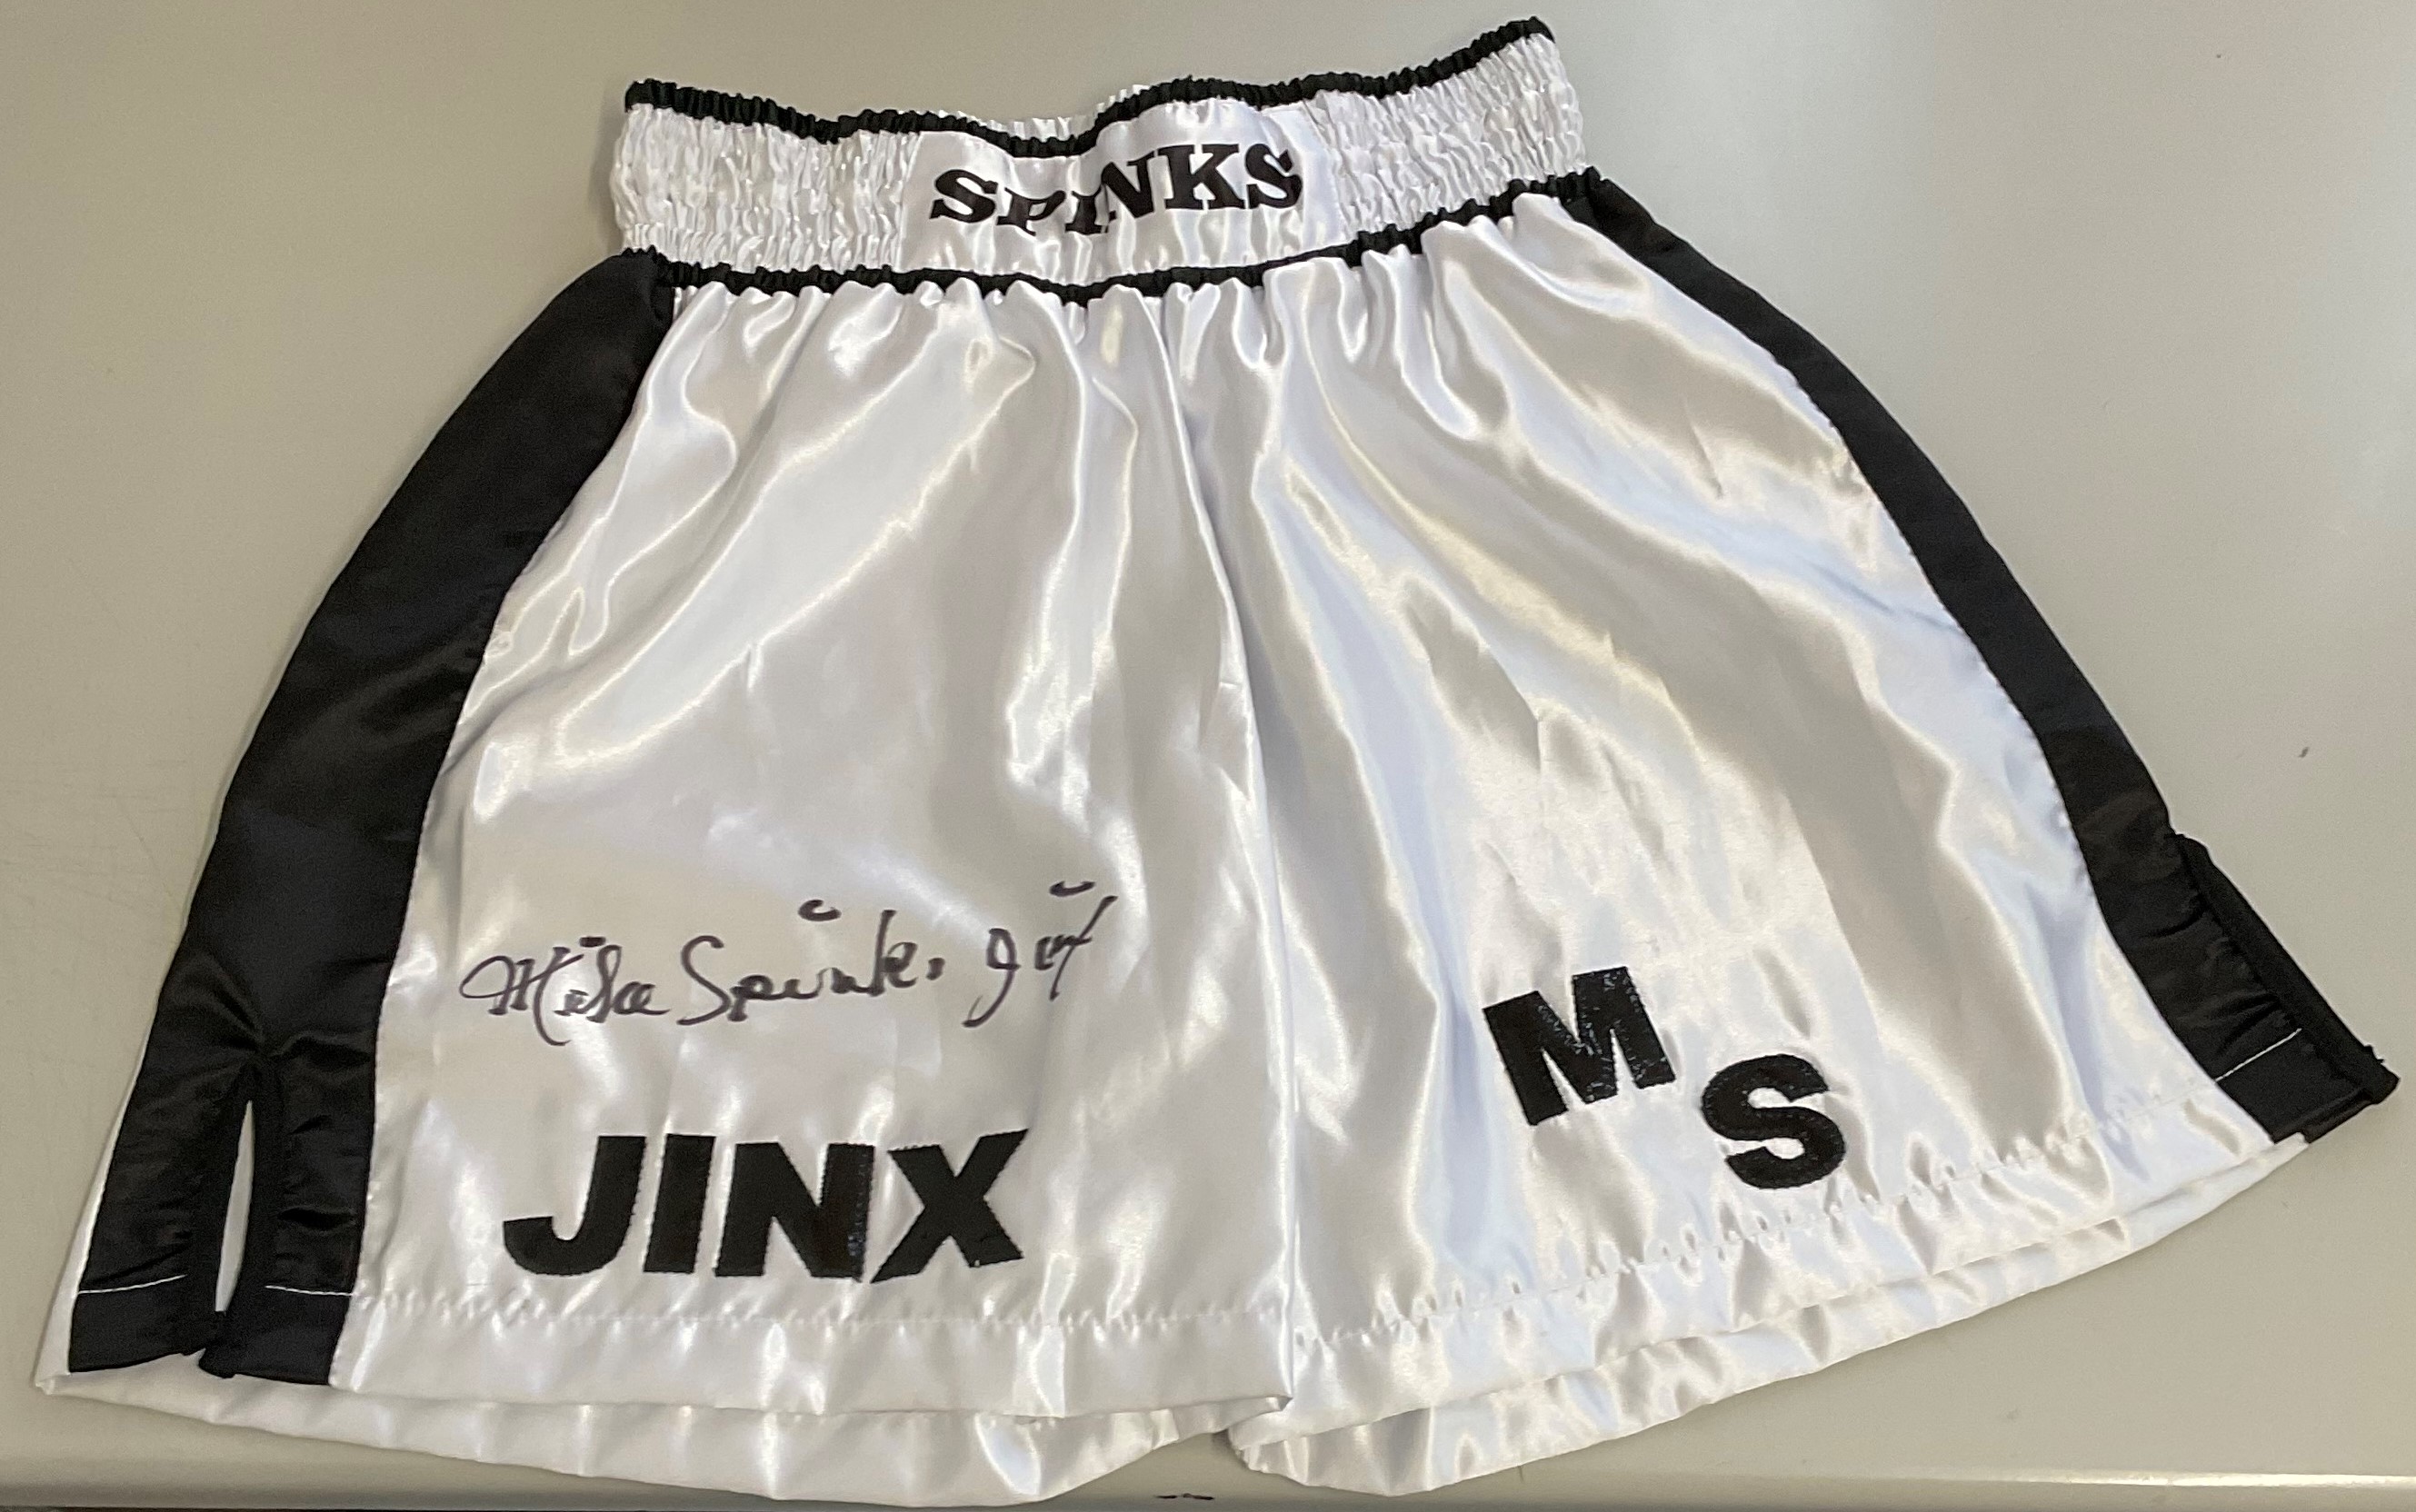 Boxing Michael Spinks signed replica black and white Boxing Shorts. Michael Spinks (born July 13,